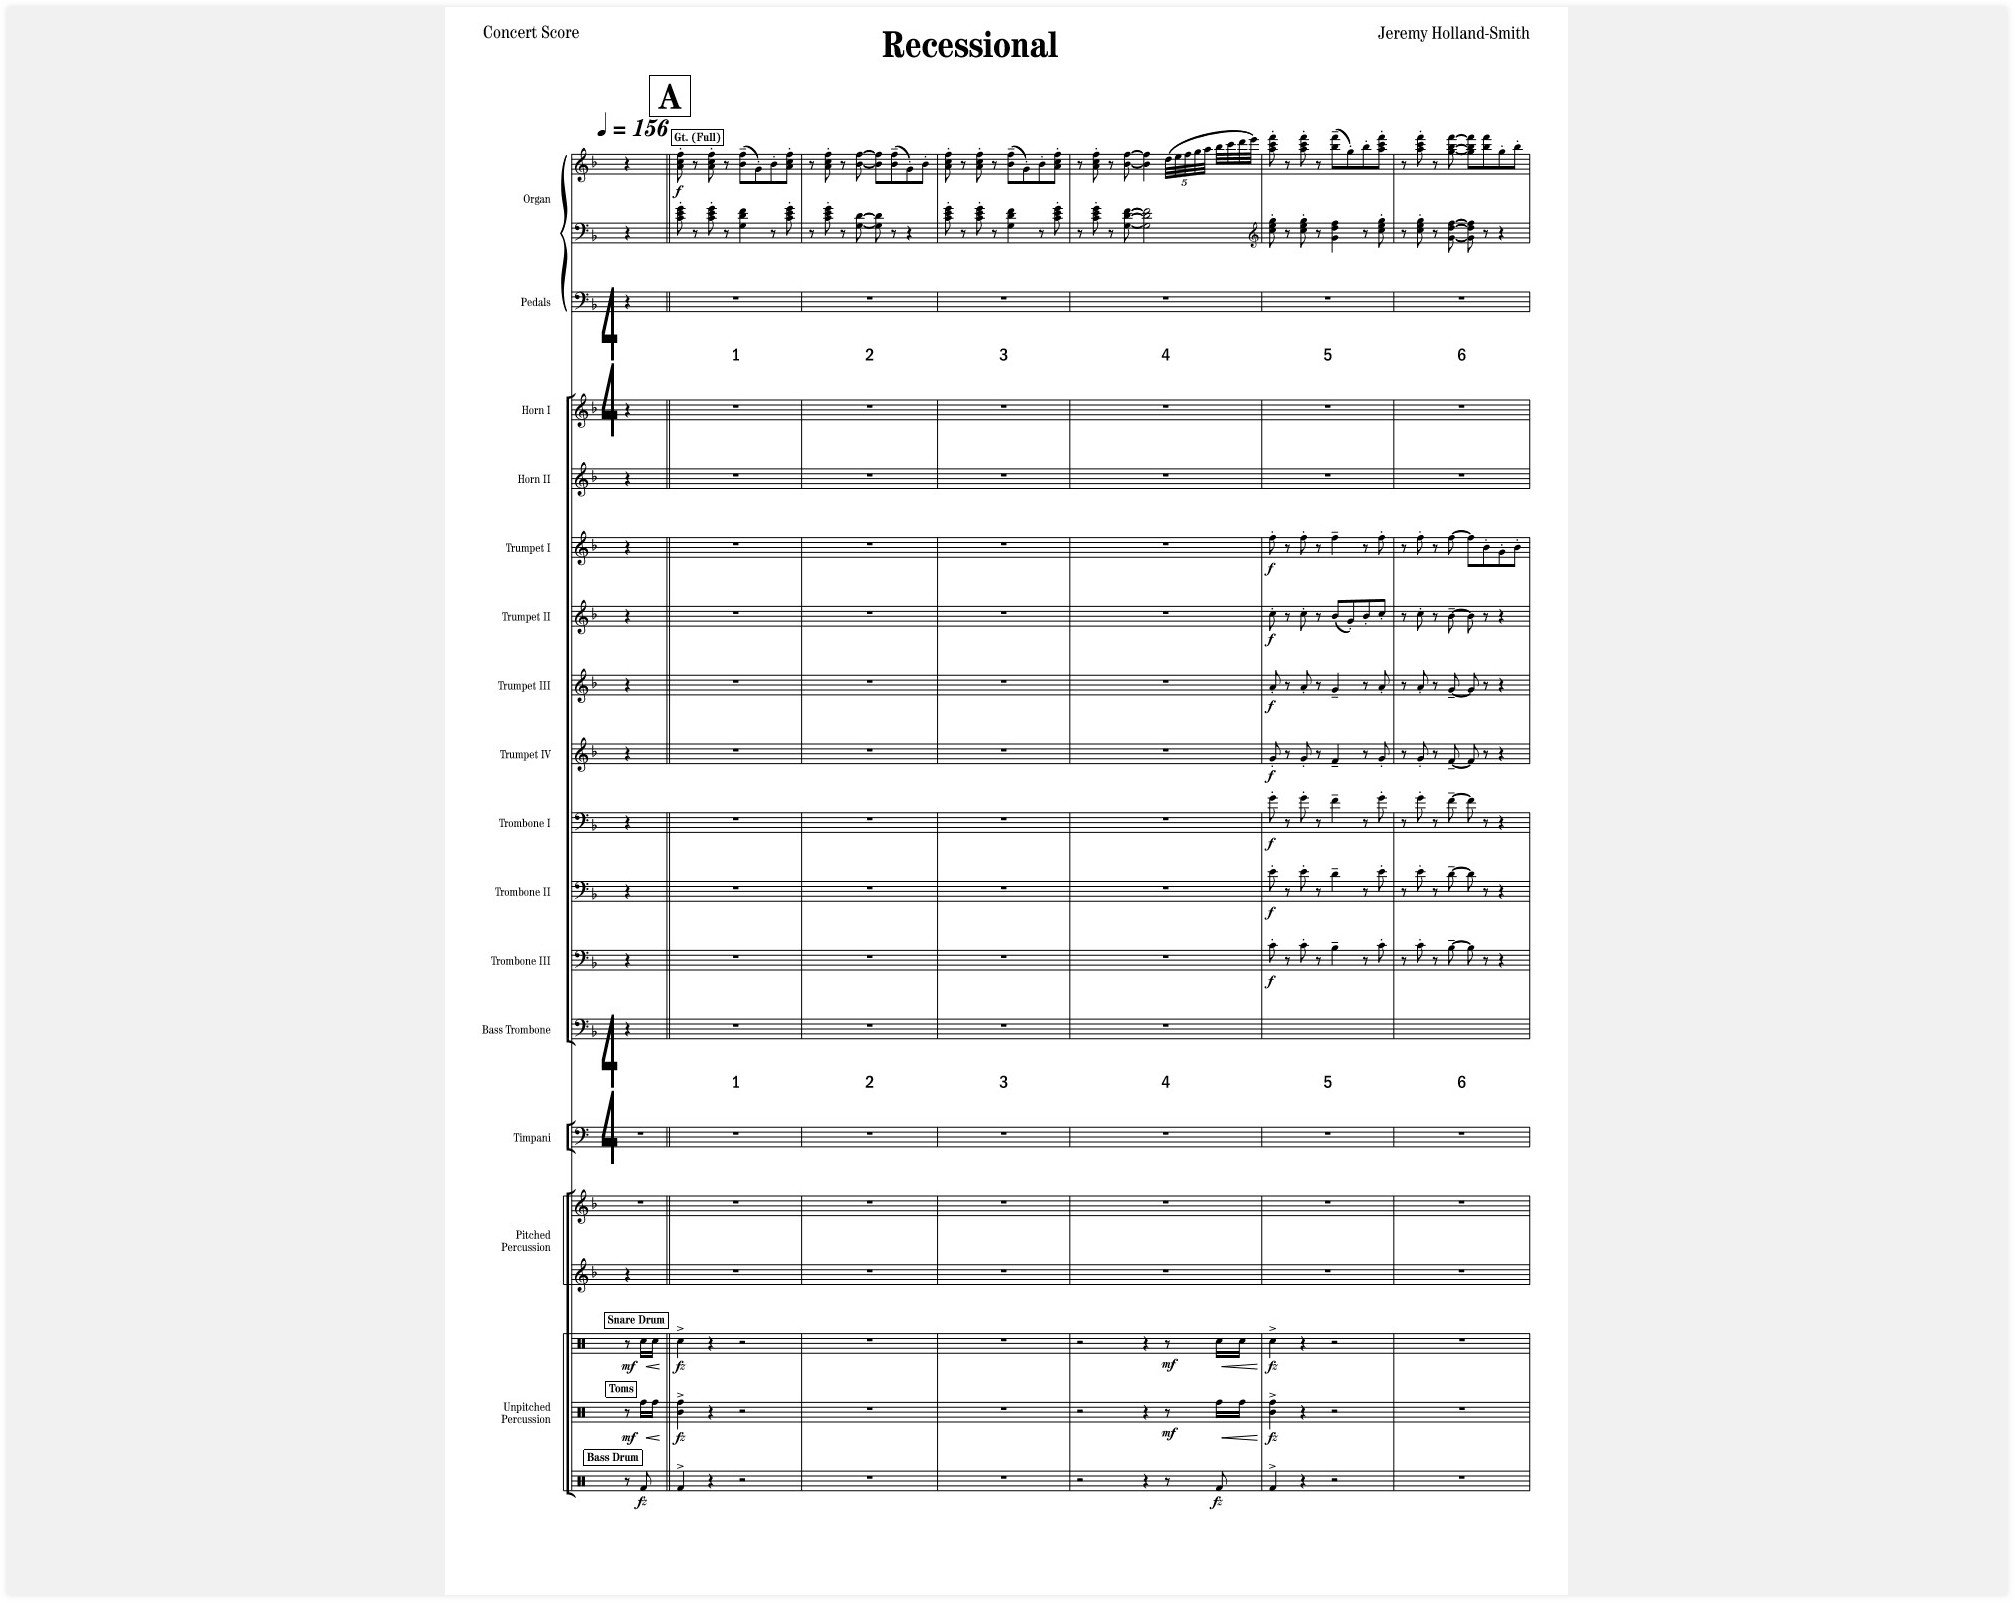 Processional and Recessional (Faber) - Concert Score_25.jpg